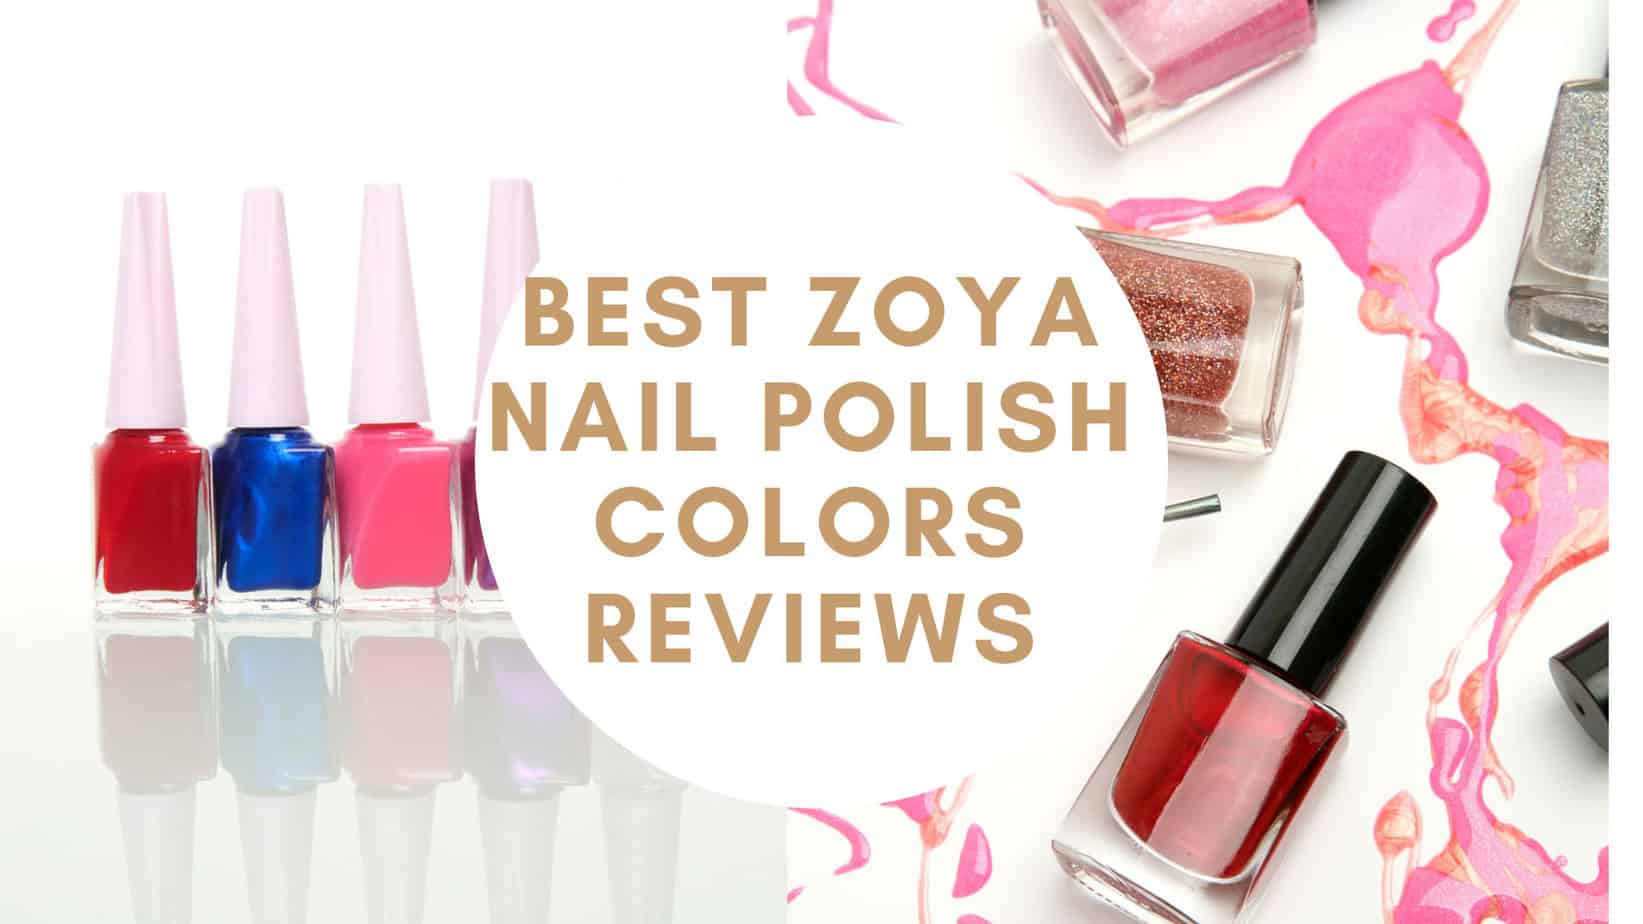 6. Zoya Nail Polish in "In the Mix" - wide 7